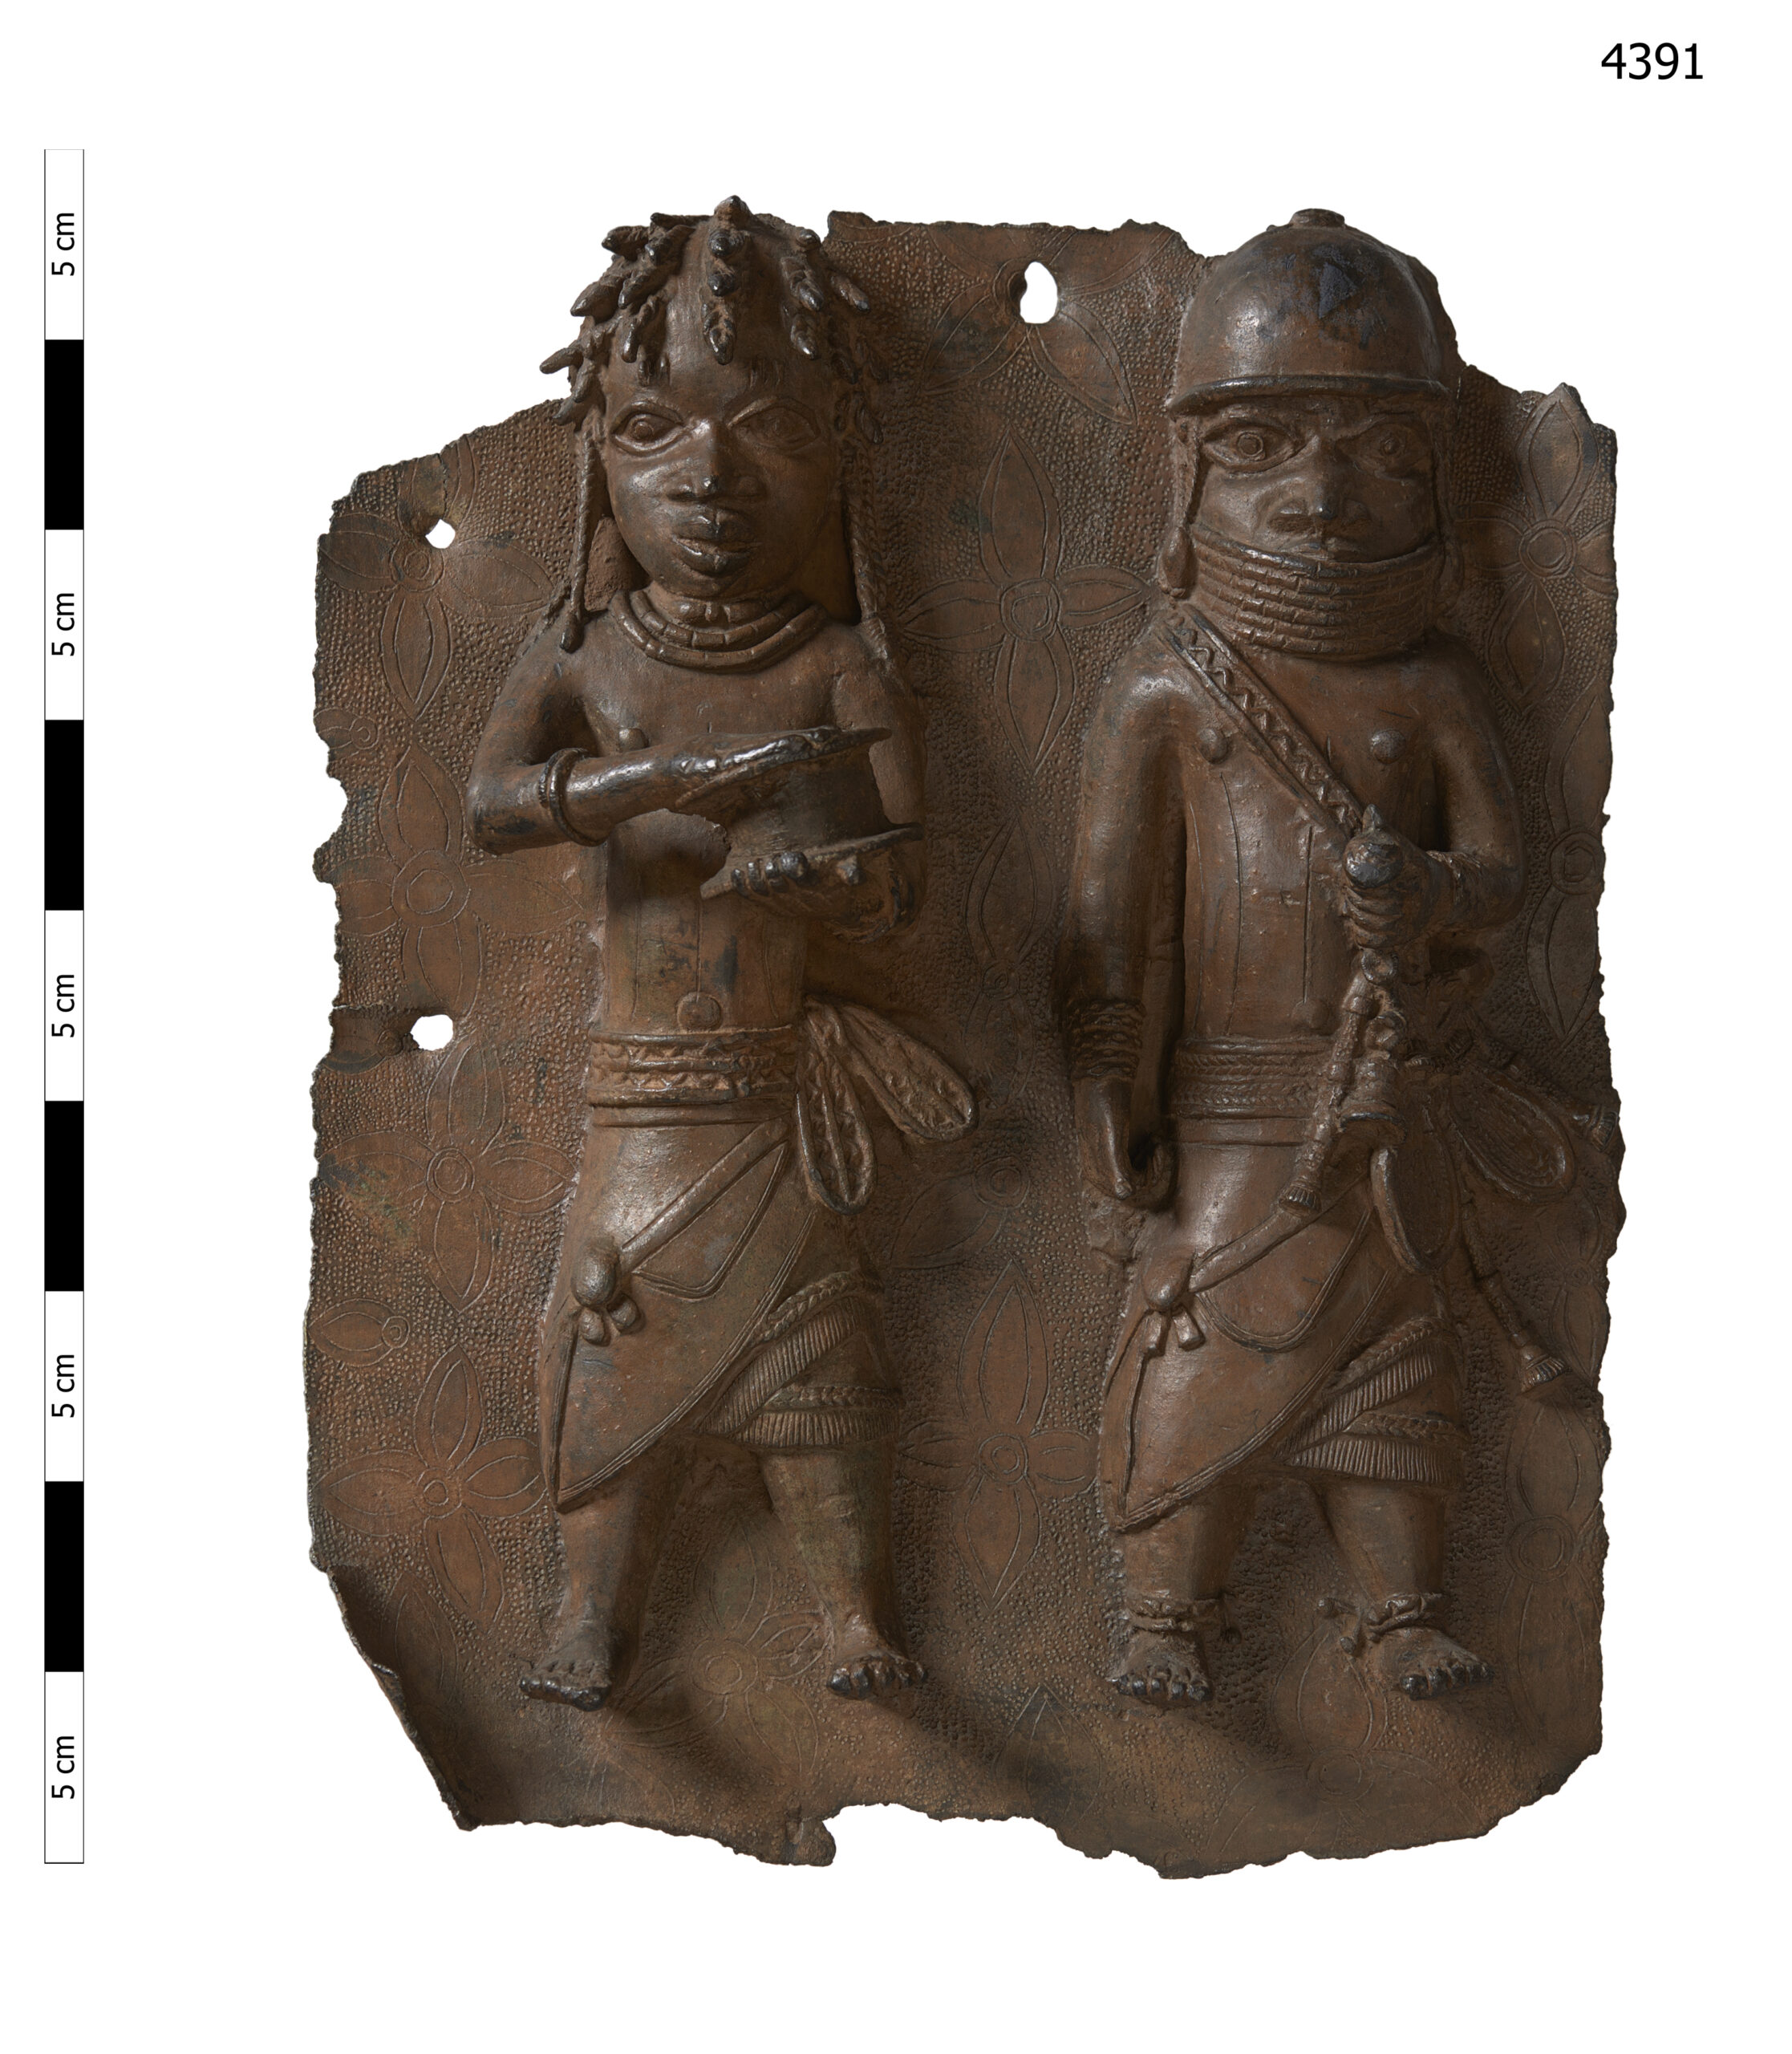 This handout photo provided by Horniman Museum and Gardens shows a brass plaque depicting a war chief and a royal military priest carrying a leather gift box. London's Horniman Museum and Gardens announced Sunday, Aug. 7, 2022 that it had agreed to return a collection of Benin Bronzes looted in the late 19th century from what is now Nigeria. (Horniman Museum and Gardens via AP)